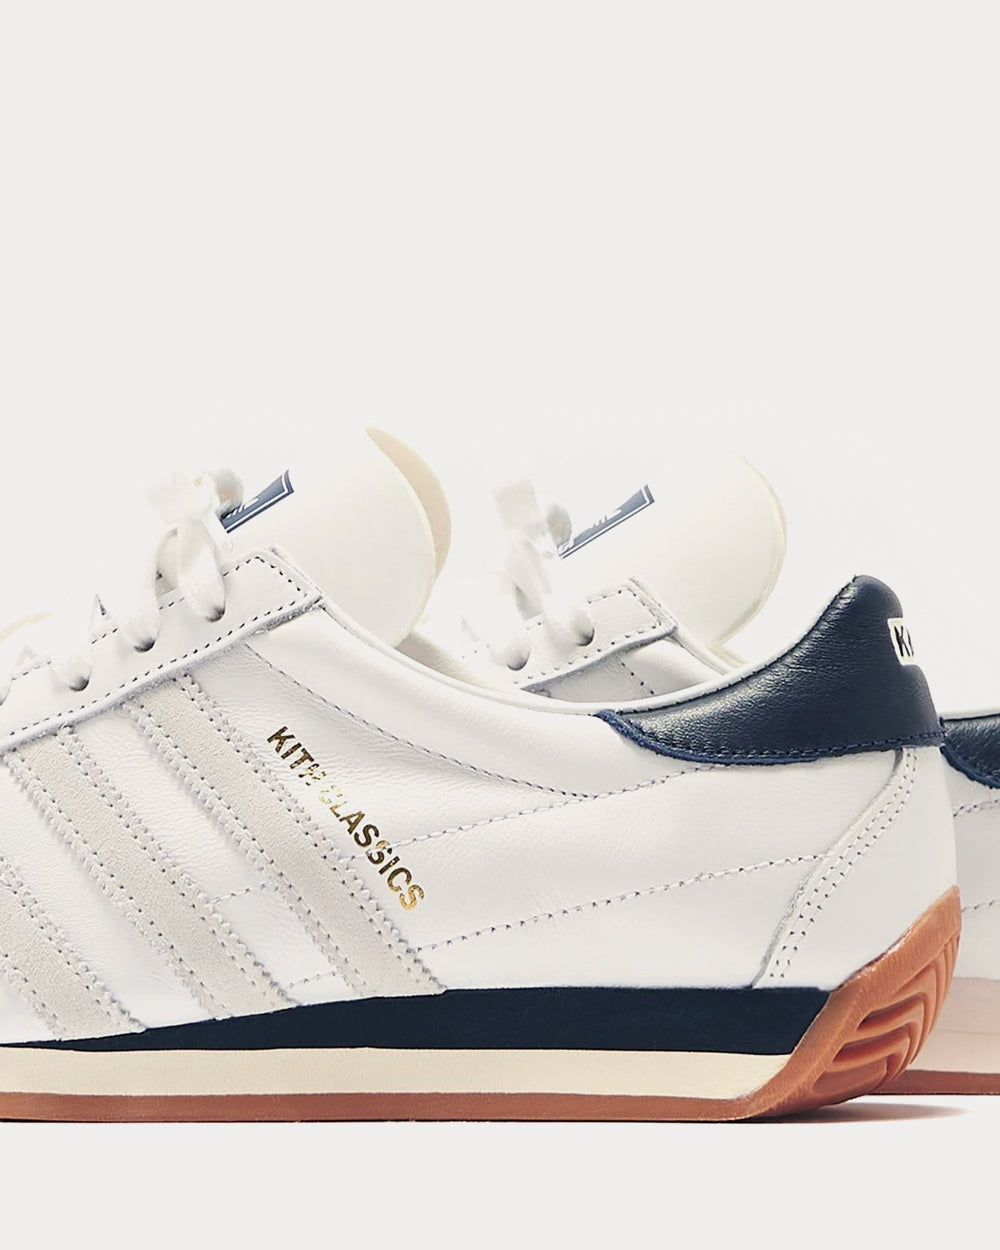 Adidas x Kith - Classics Program Country White / Collegiate Blue / Gold Low Top Sneakers